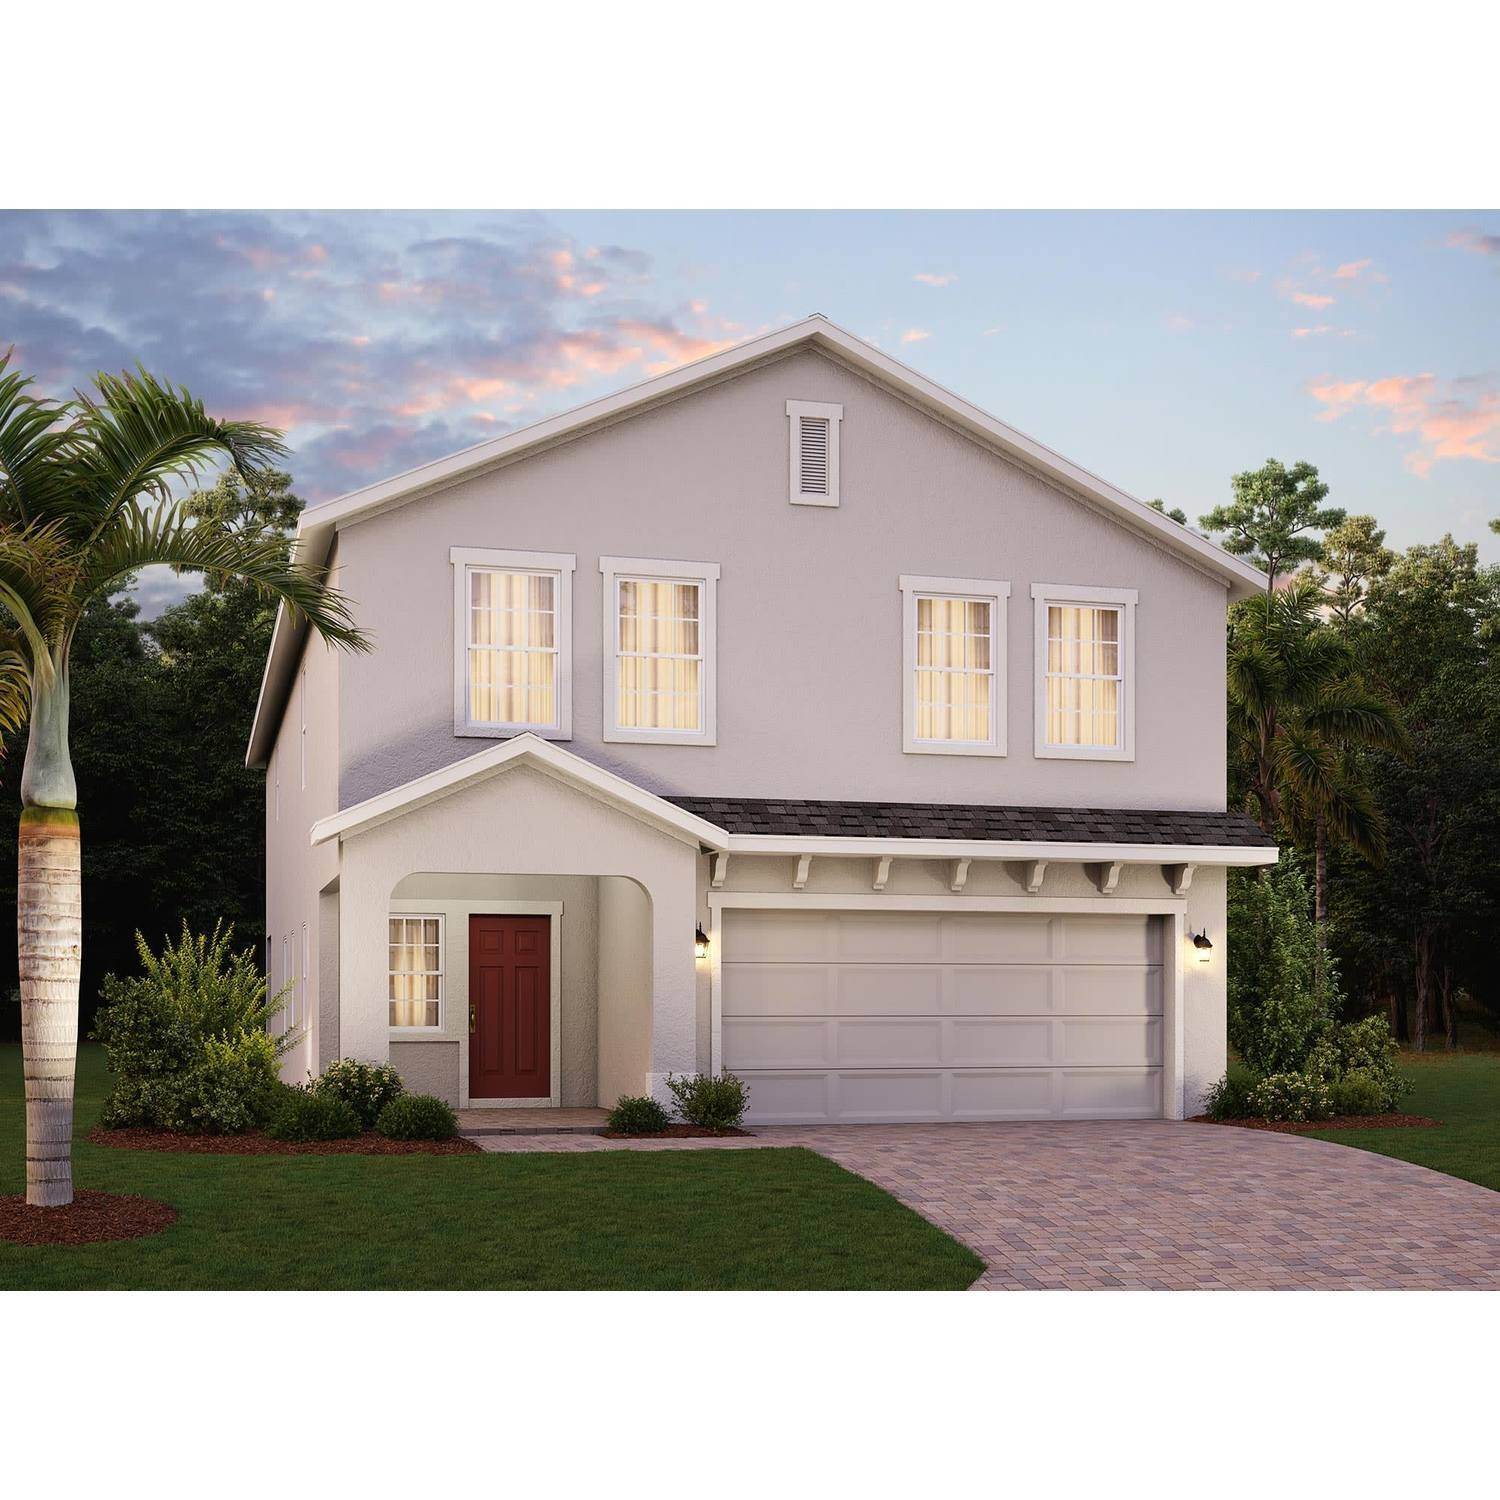 Single Family for Sale at St. Cloud, FL 34769